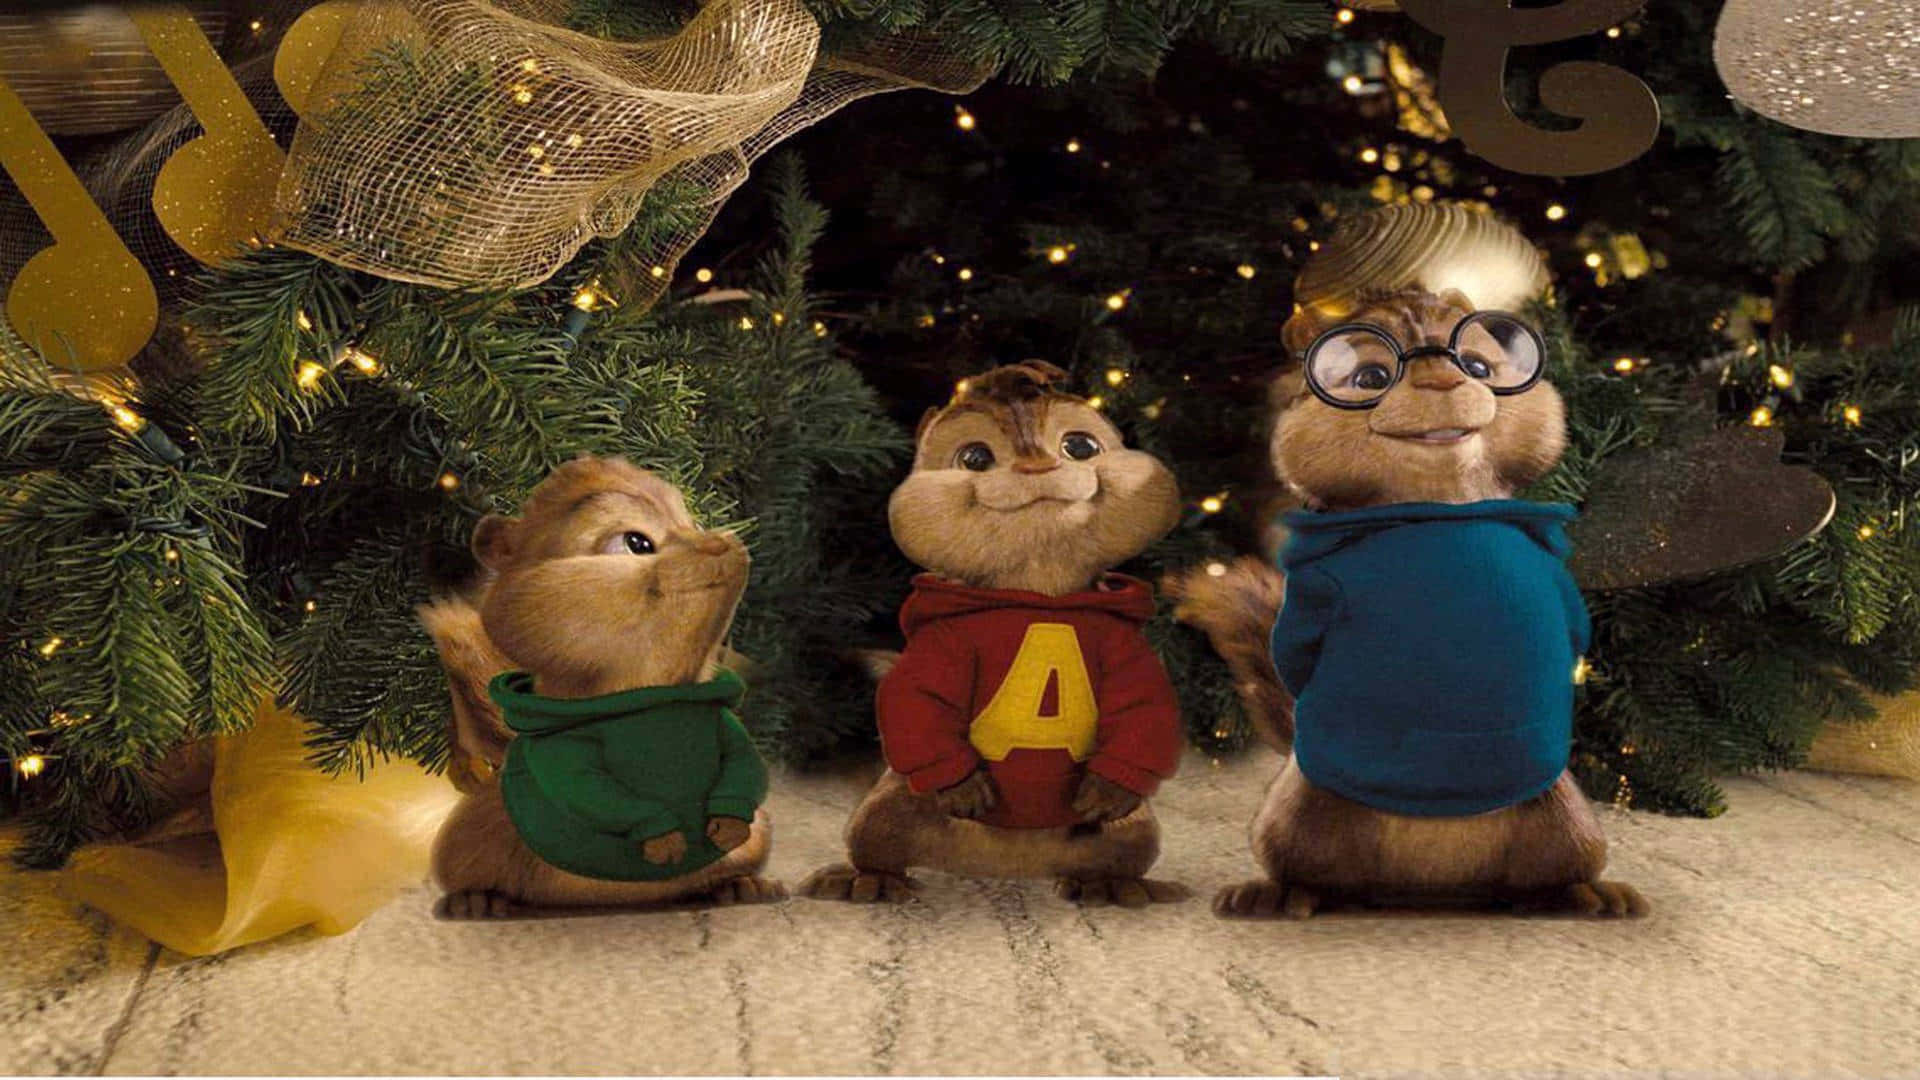 The Chipmunks have the world at their feet!